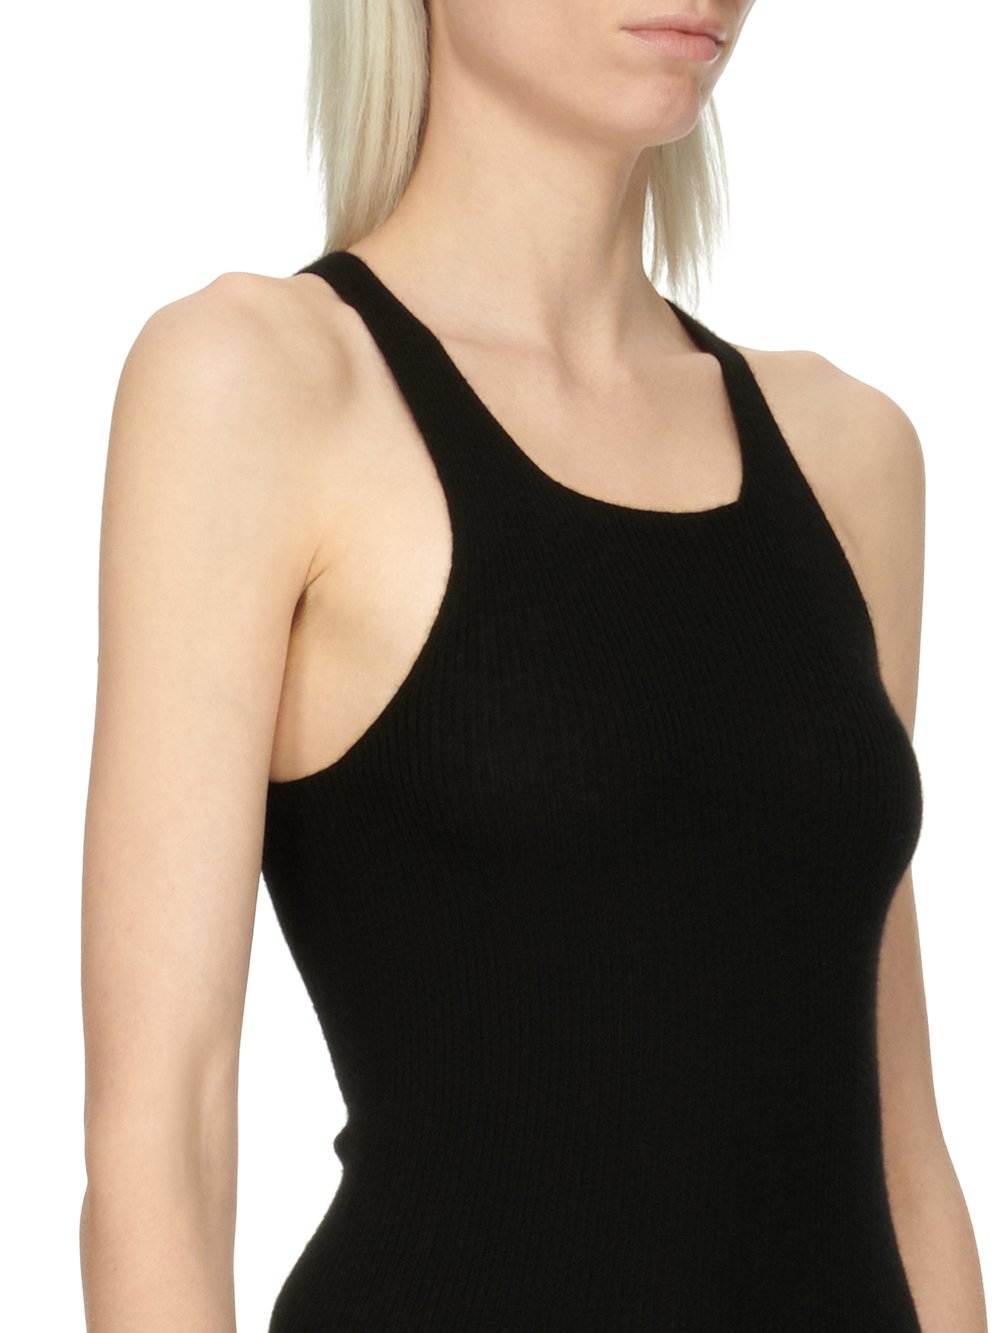 RICK OWENS FOREVER RIB TANK TOP IN BLACK BOILED CASHMERE.